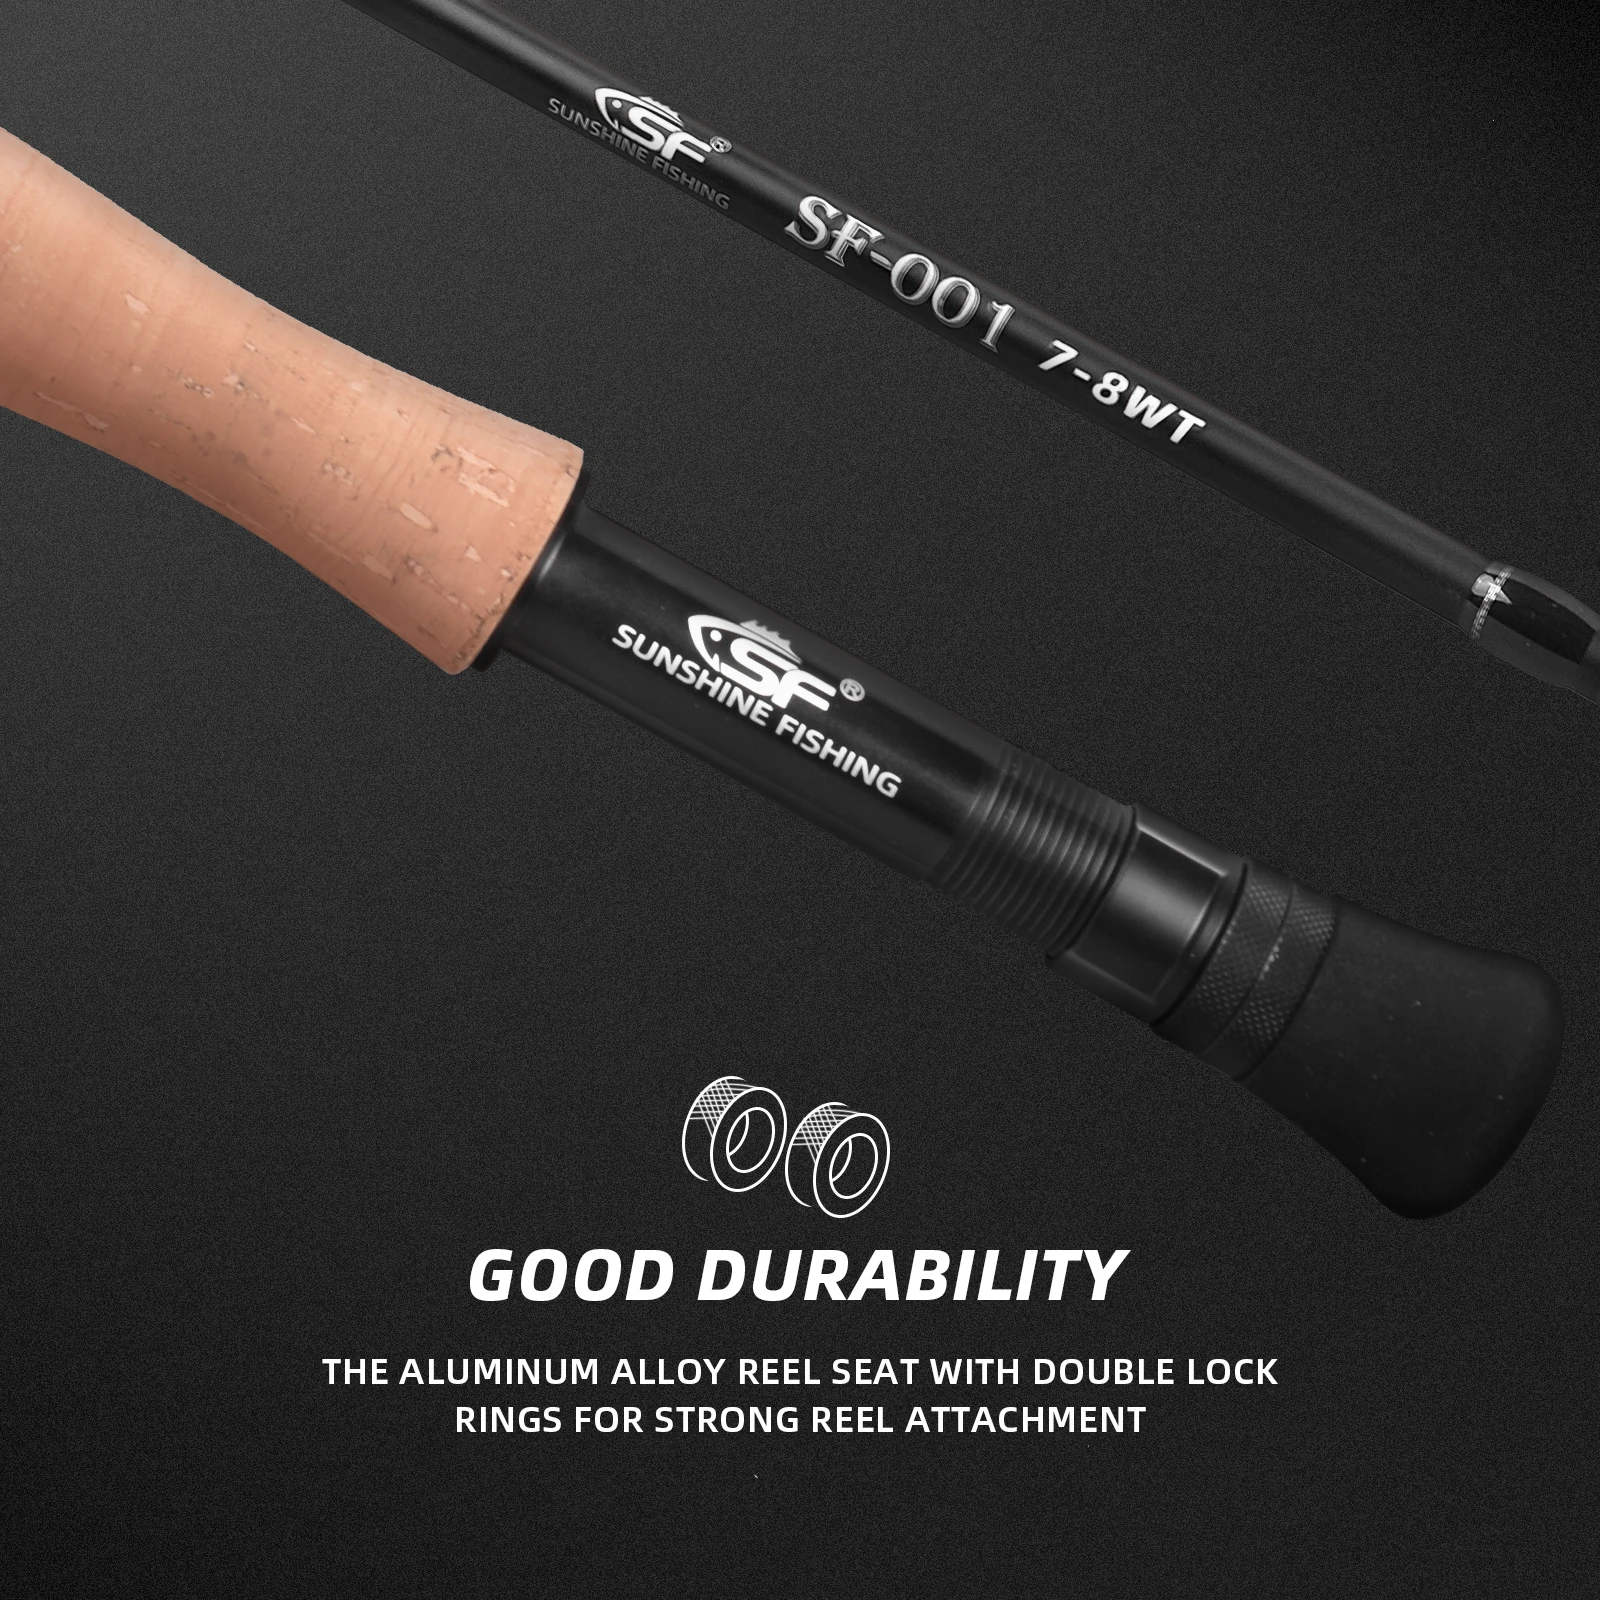 SF Fly Fishing Rod with Straight Rod Bag 4 Piece 7.6FT 9FT 3/4/5/6/7/8wt  Matt Black Trout Fly Rod IM7 Carbon Fiber for beginners